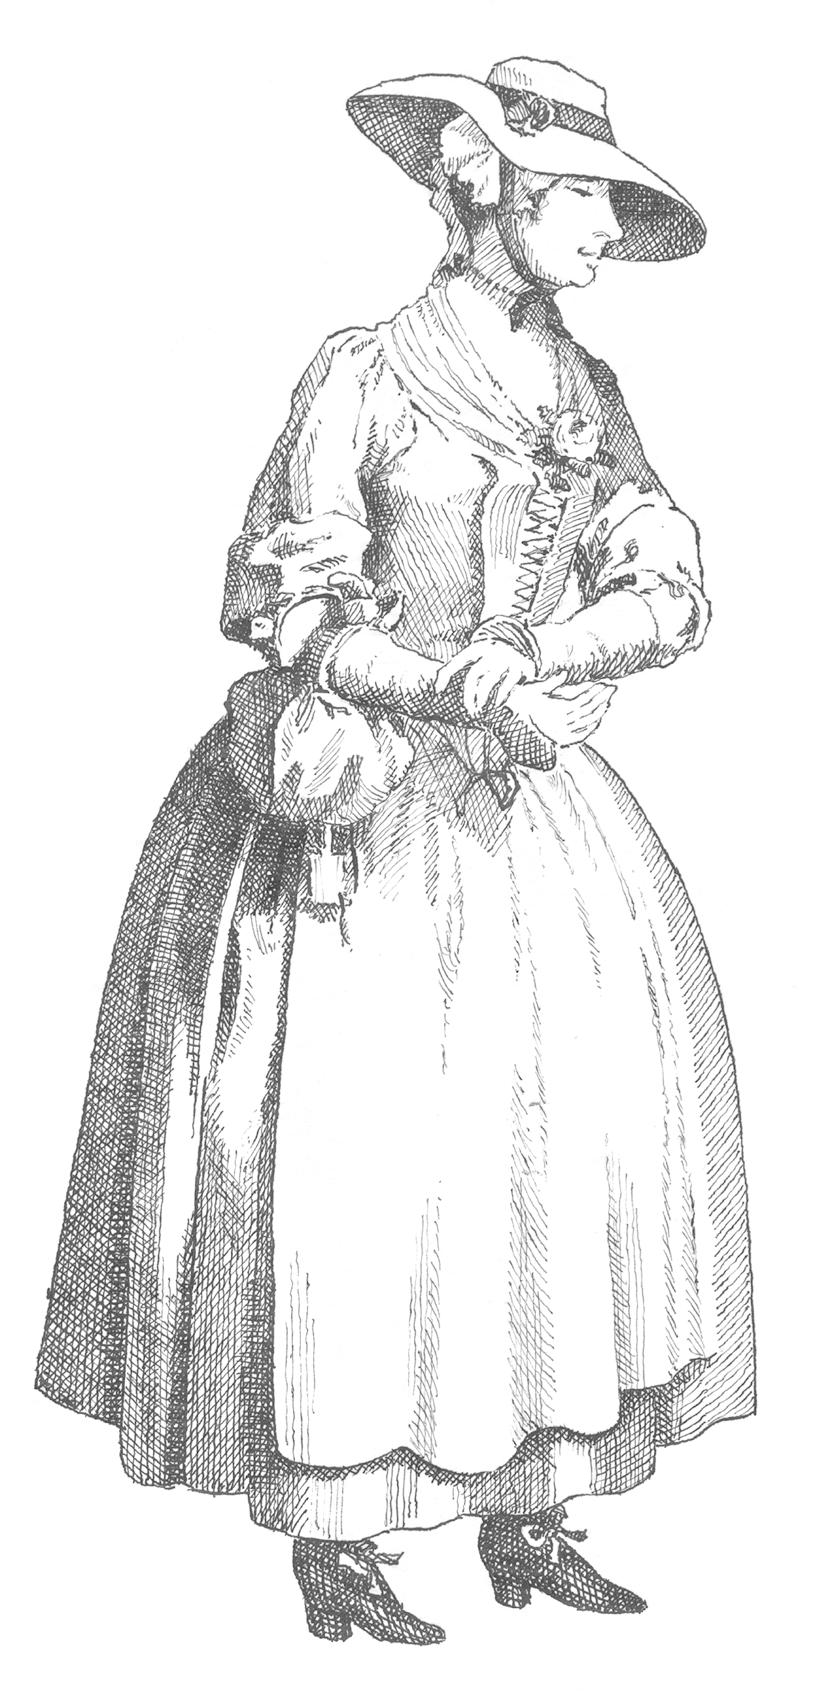 BRITISH Charlotte Browne (Broun) Illustration of Browne Charlotte Browne came to Virginia in 1755. She was with the British army. Her job was head nurse, or matron. She came with her brother.